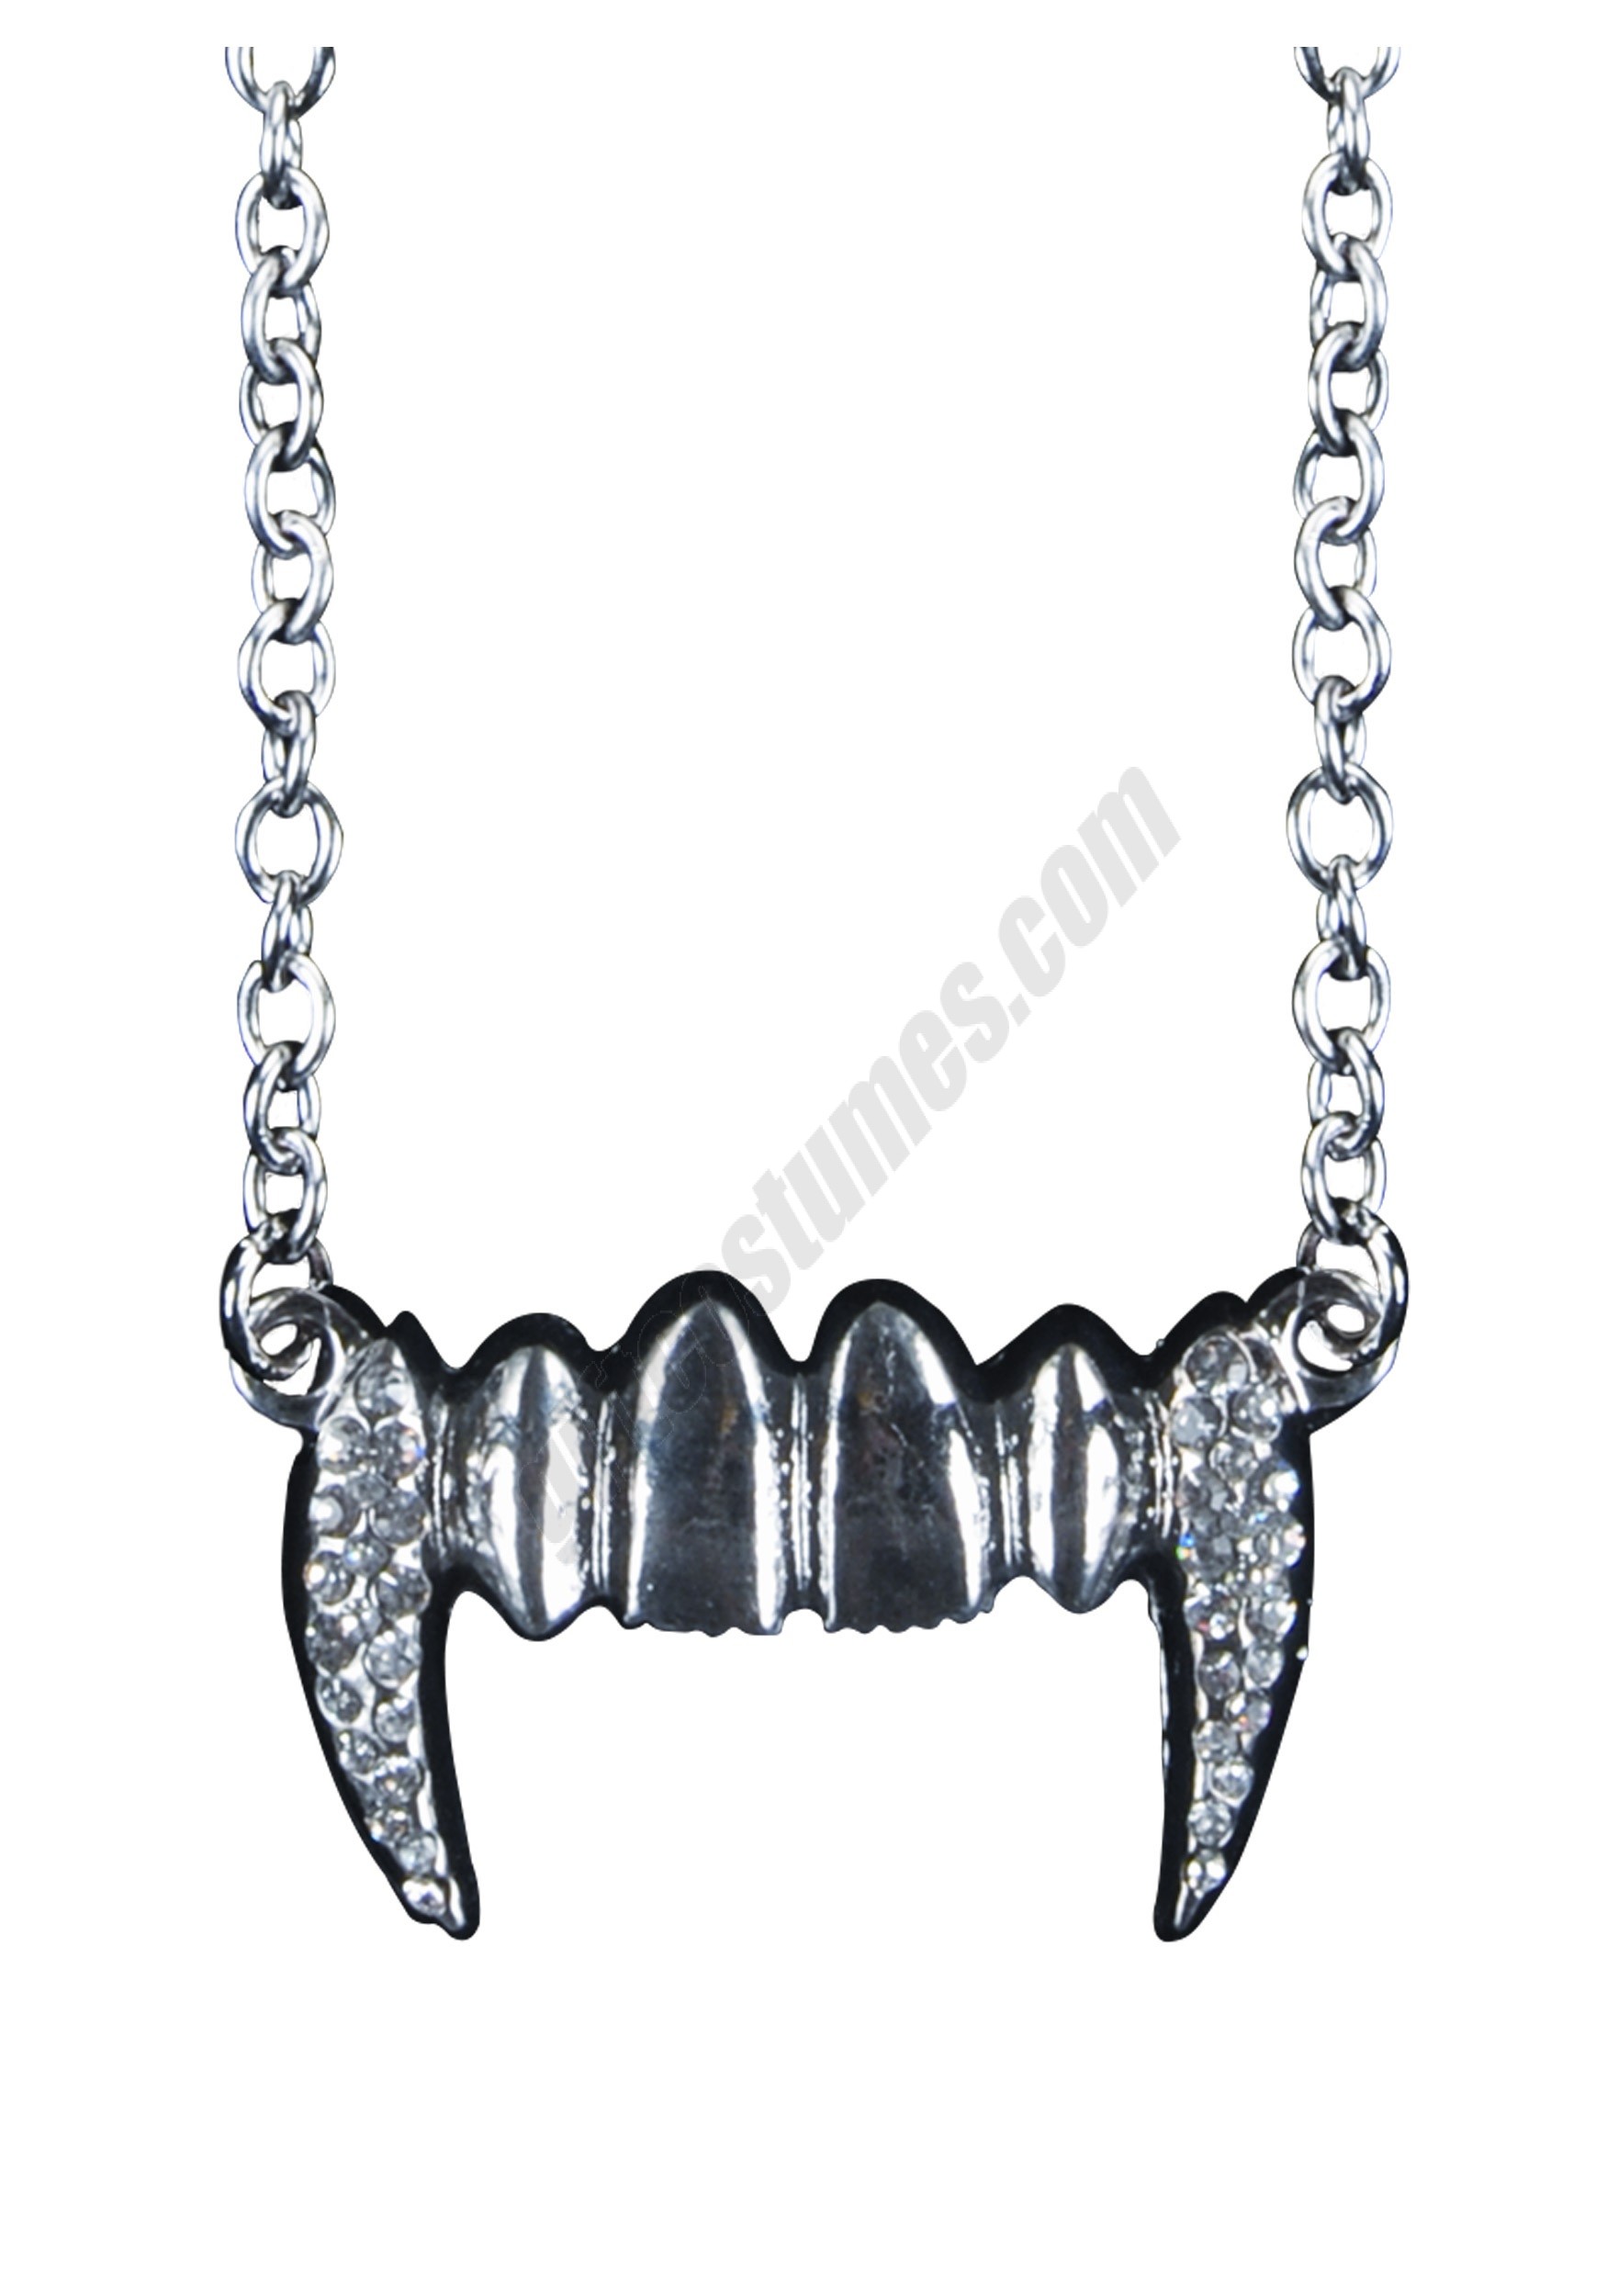 Vampire Fang Necklace Promotions - Vampire Fang Necklace Promotions